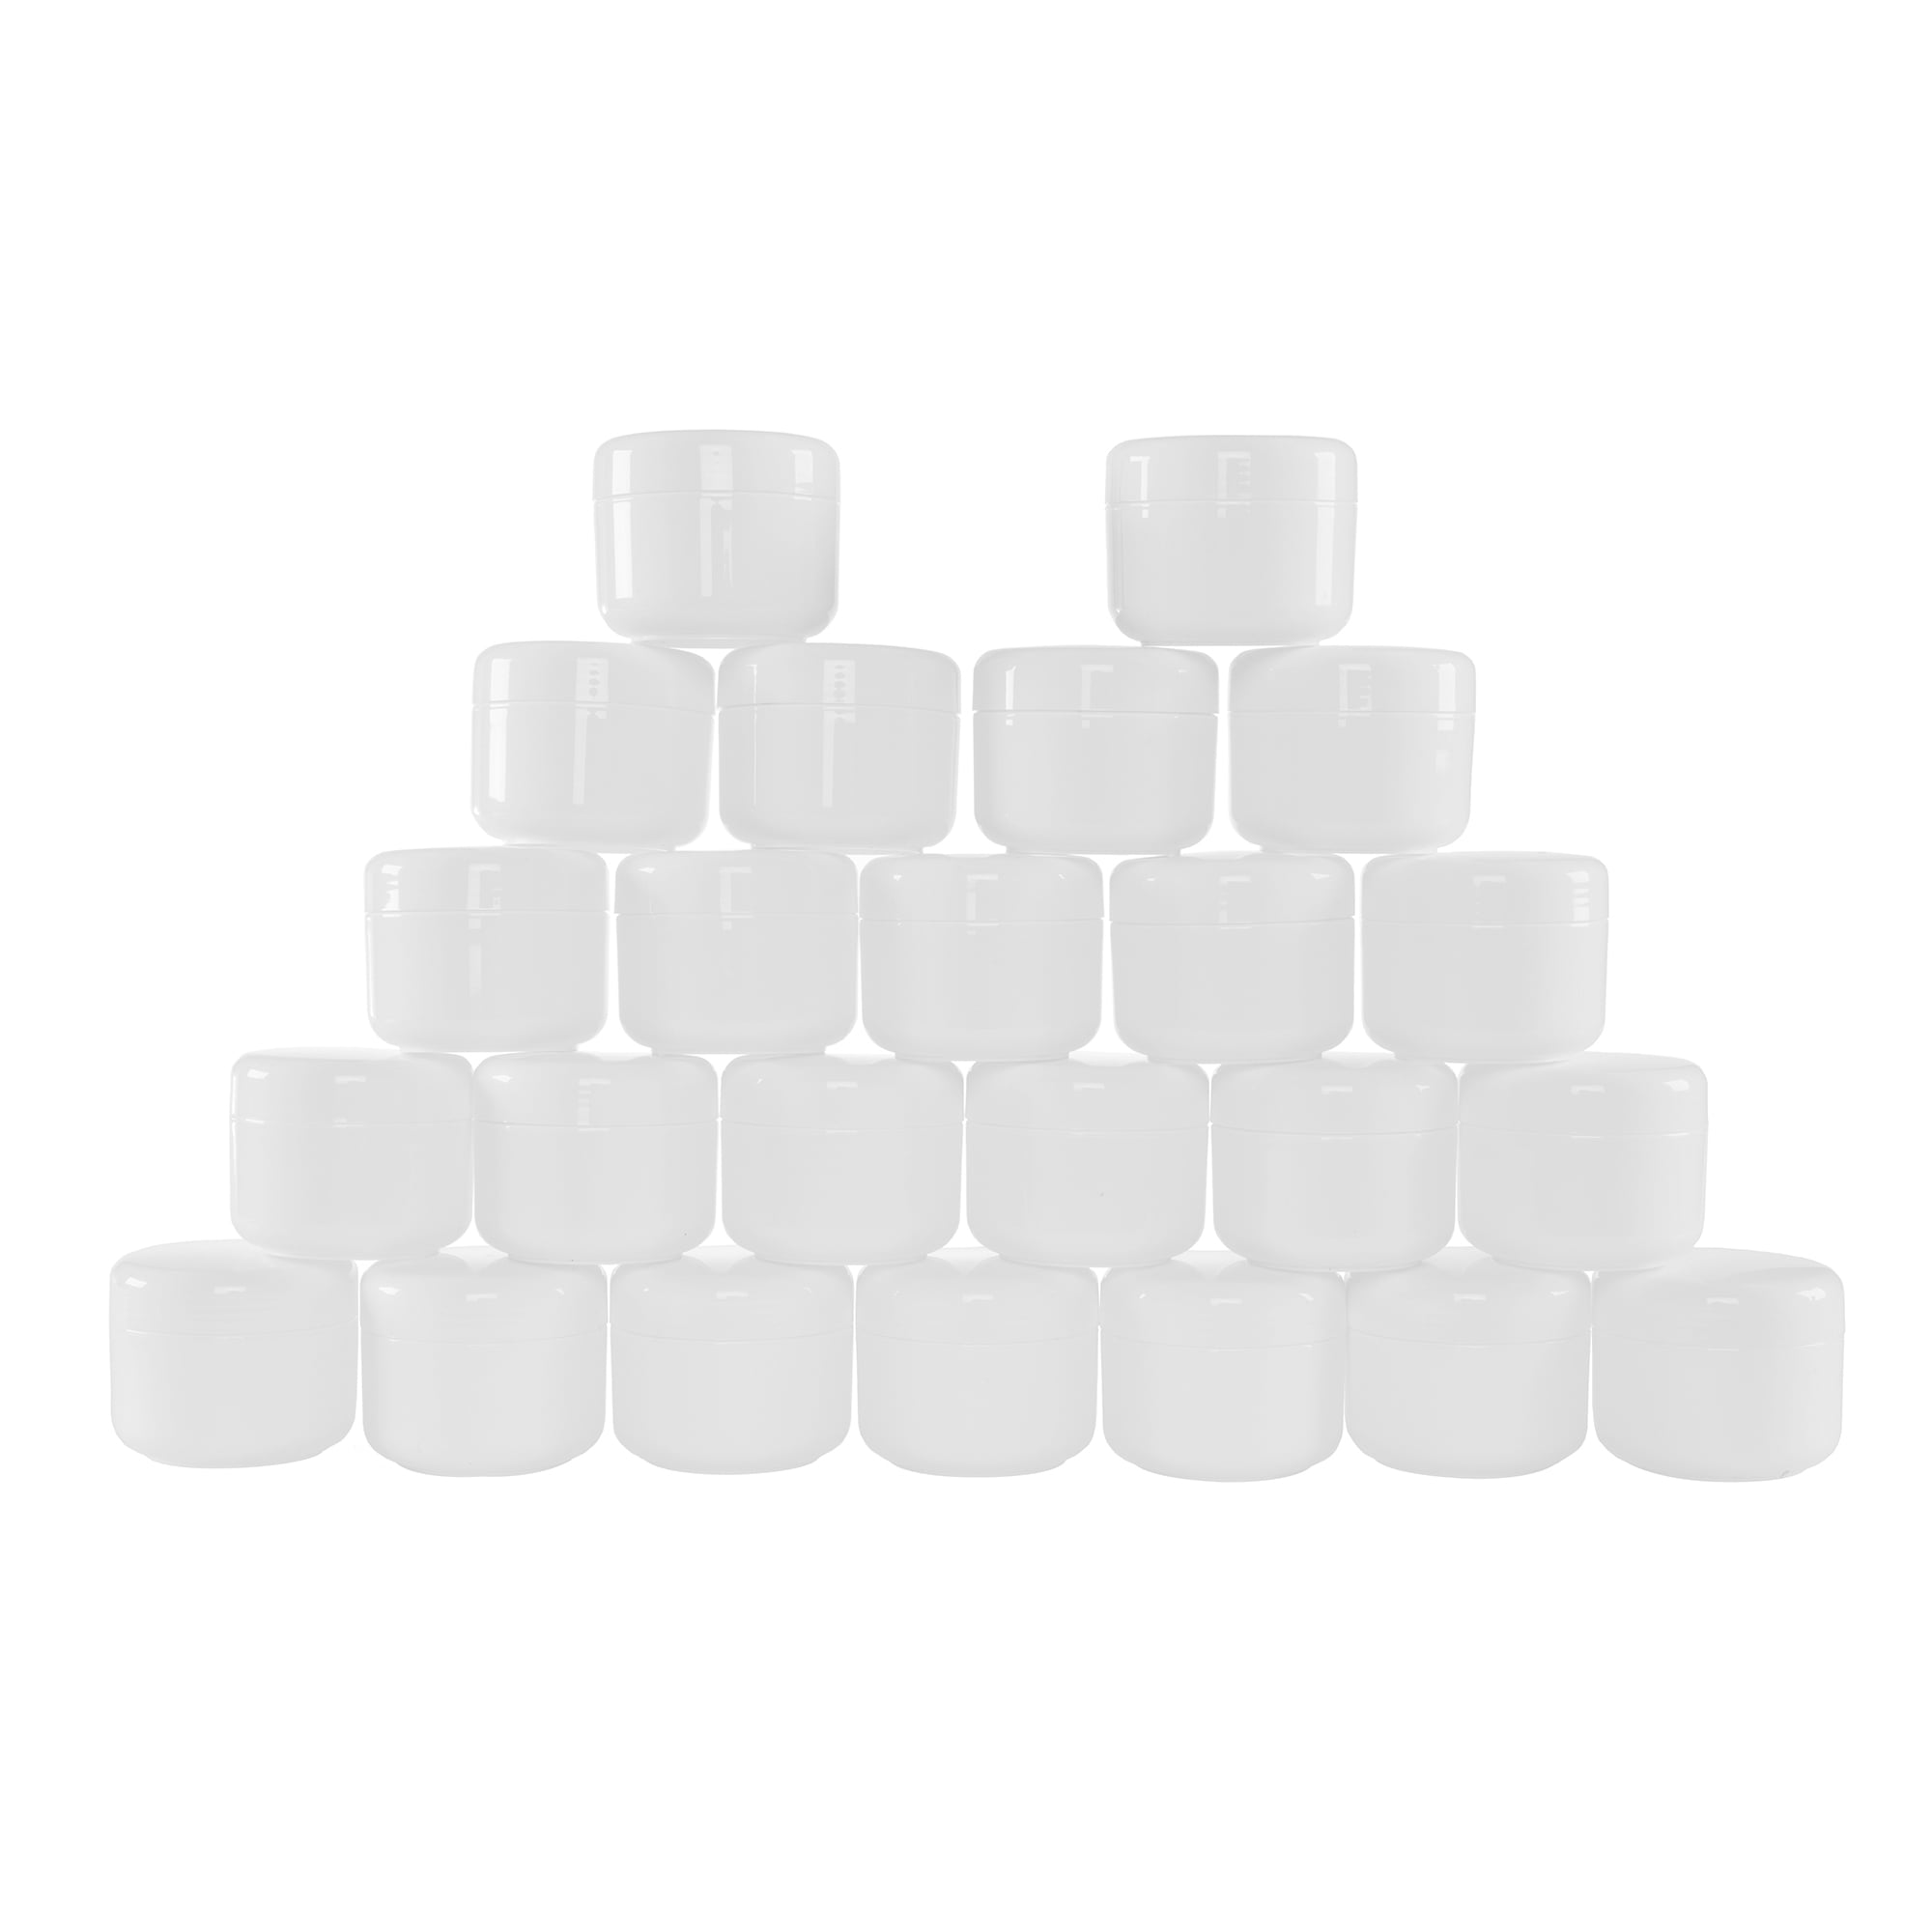 4 oz Small Plastic Containers with Lids 24 Pack Plastic Jars with Lids +  20g/20ml Small Containers with Lids Cosmetic Sample Jar - for Lip Scrub,  Bod - Imported Products from USA - iBhejo